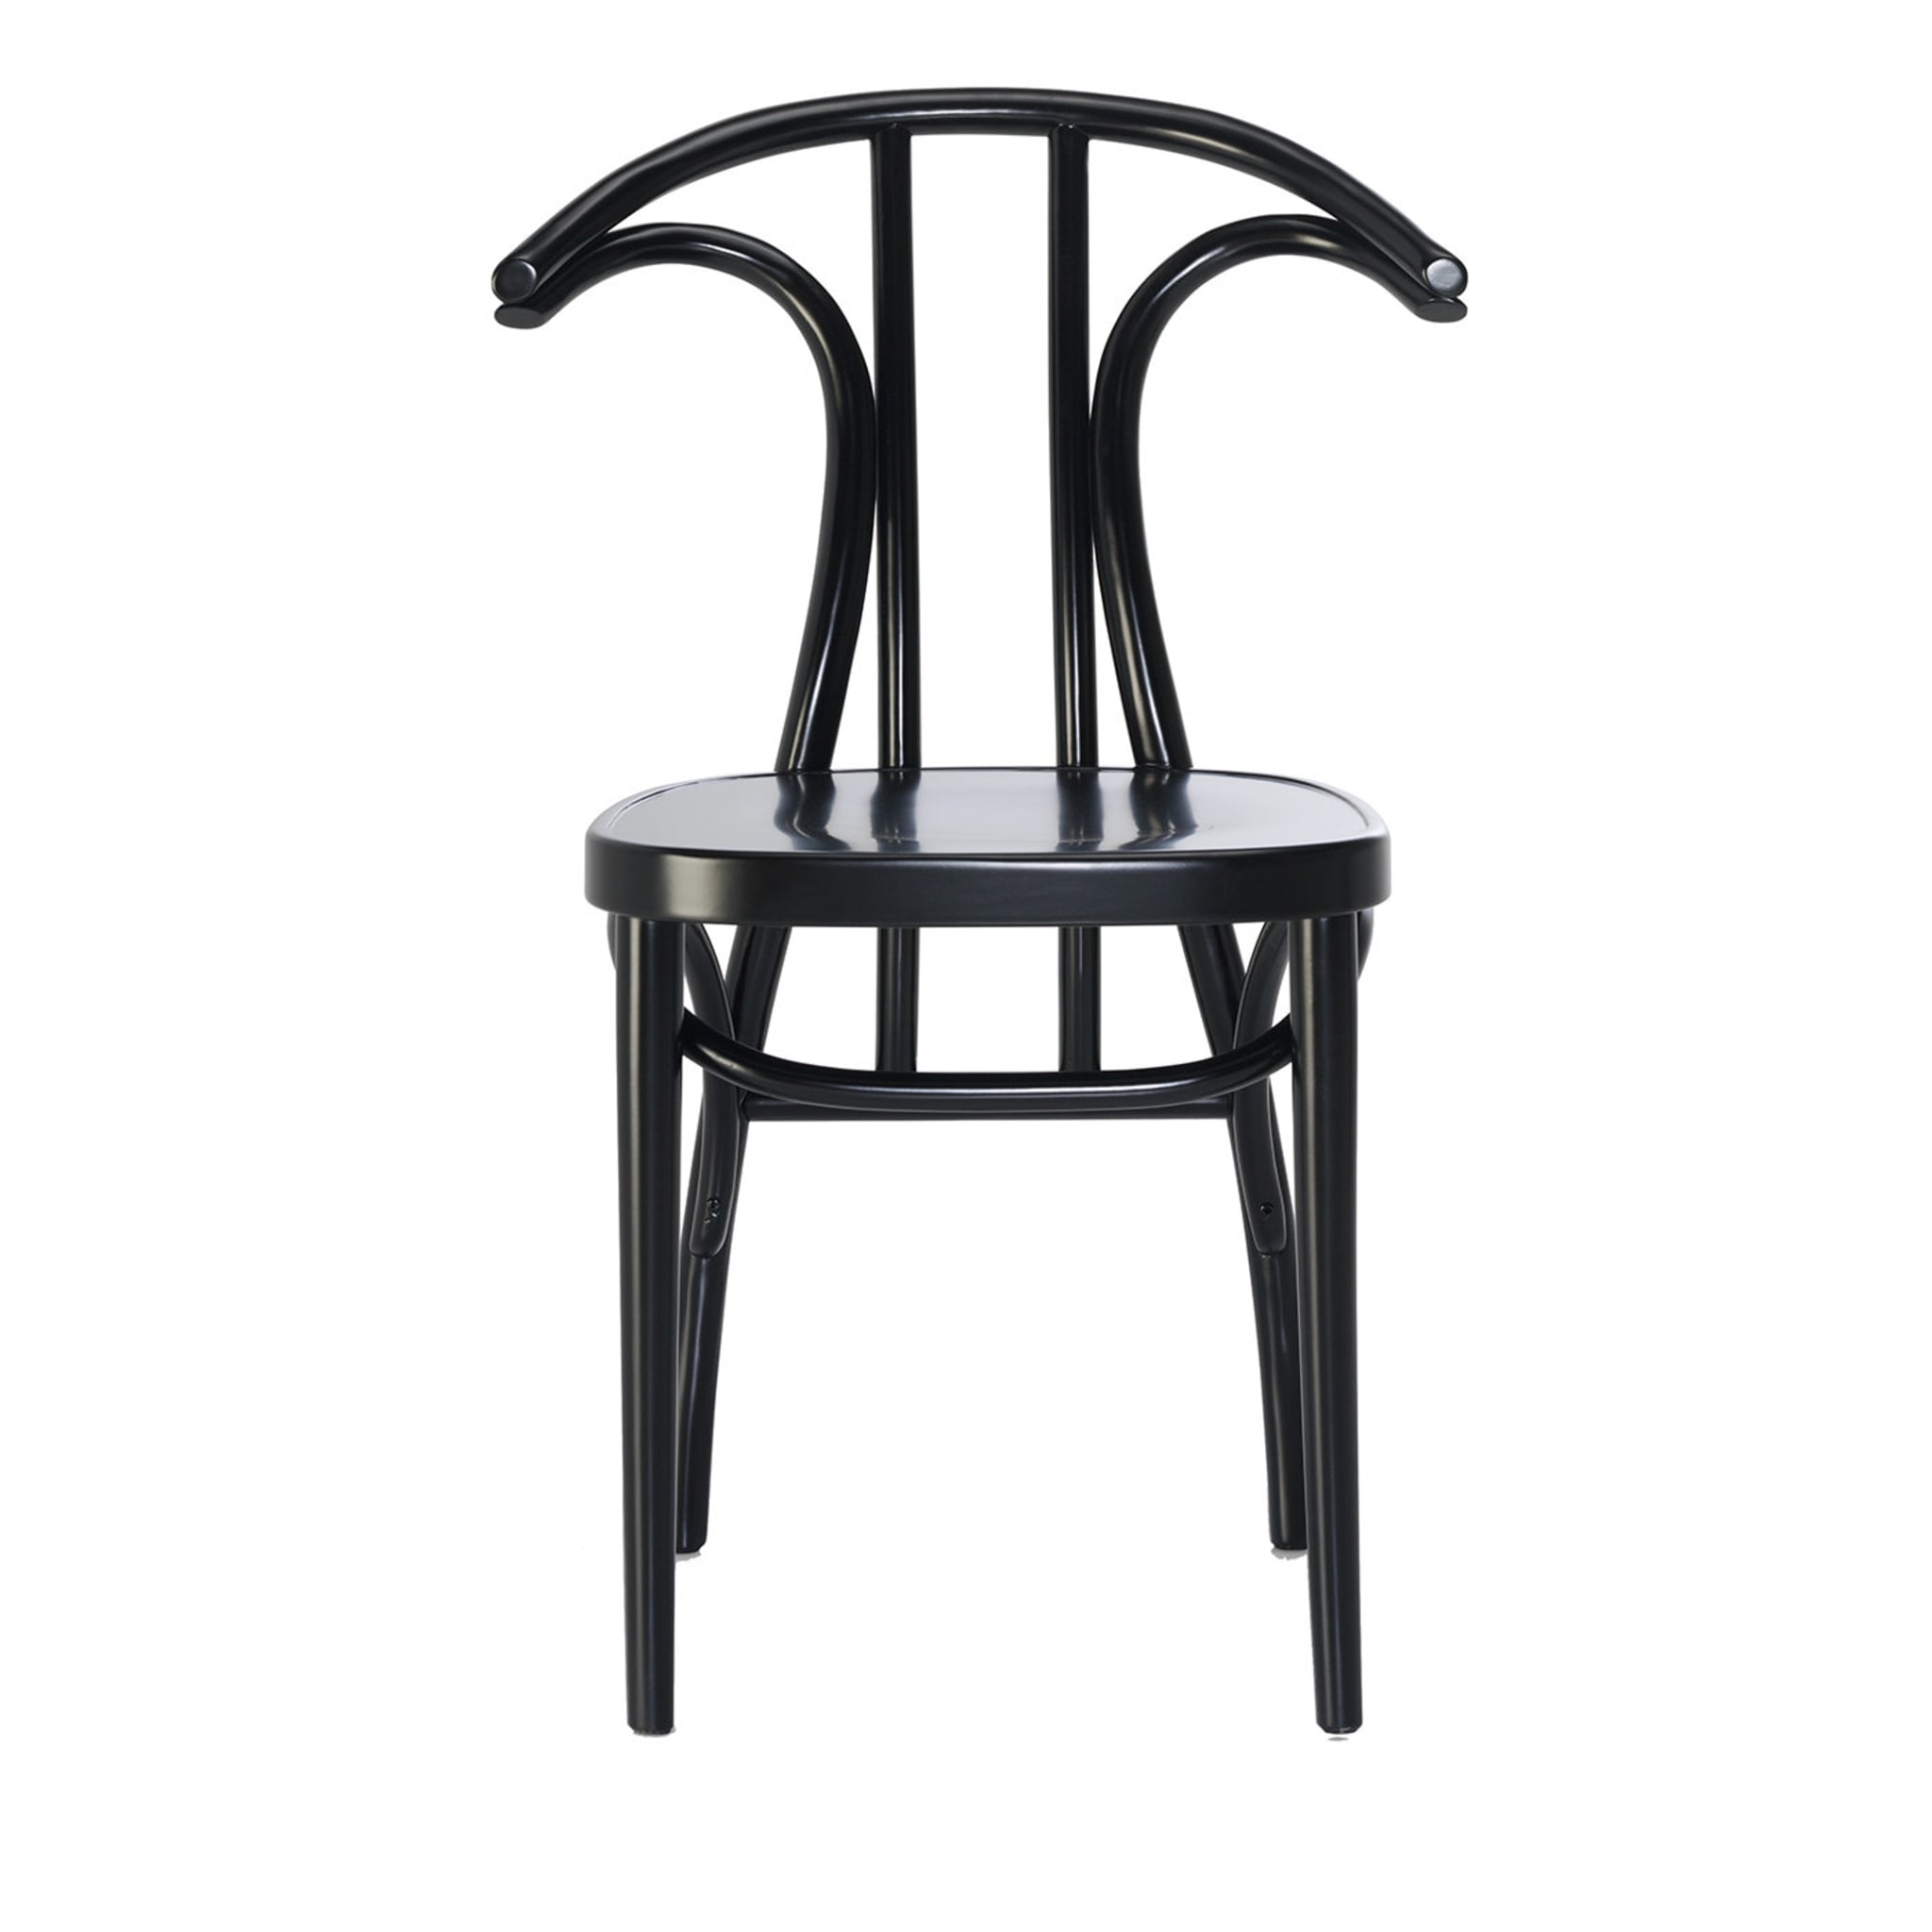 Radetzky Chair by Michele De Lucchi - Alternative view 3